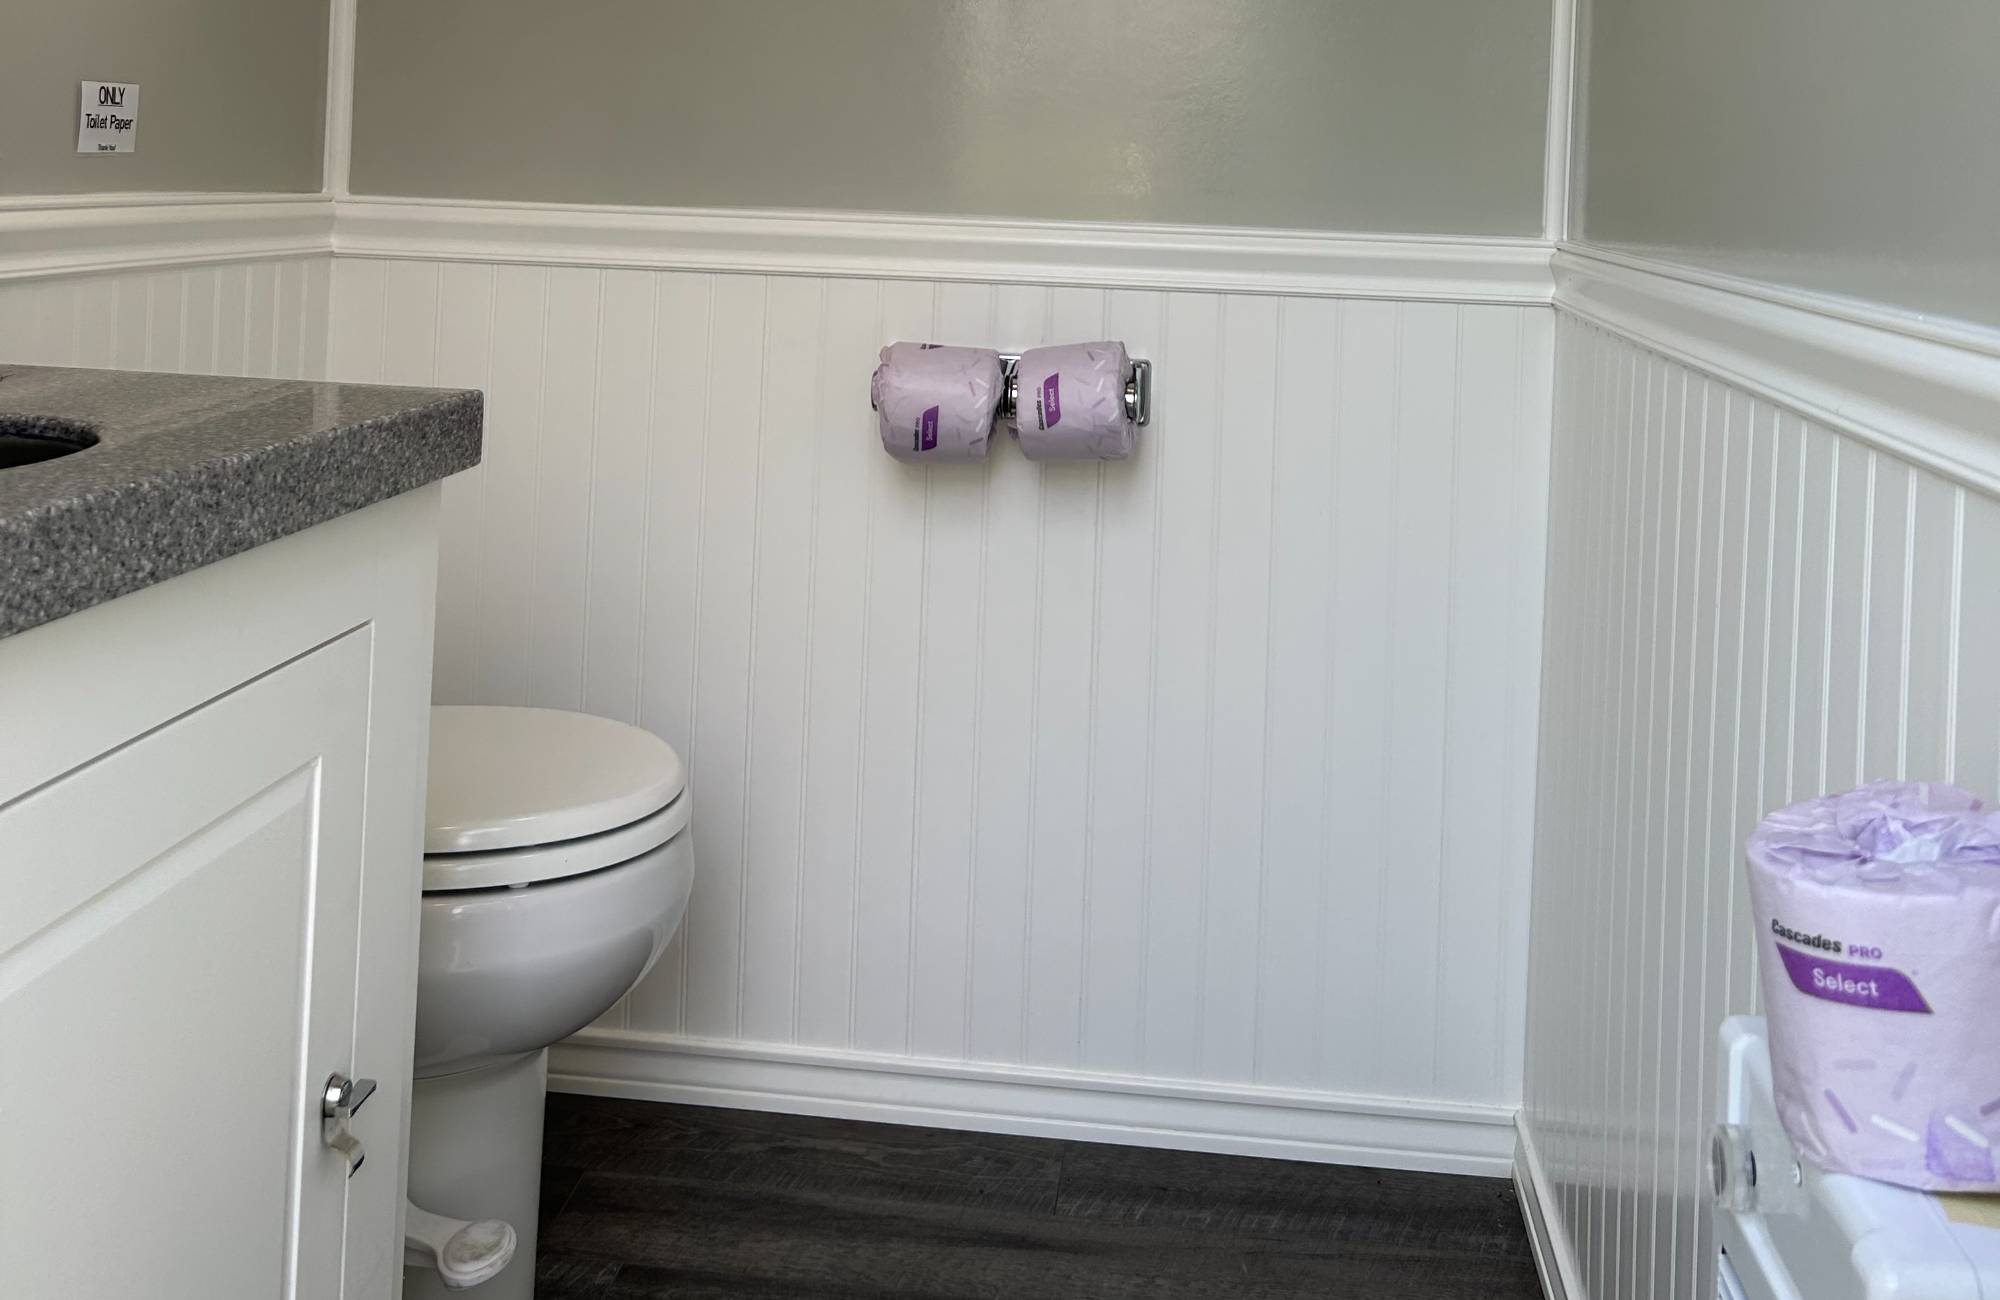 Keeping Costs Low: Finding Affordable Construction Site Washroom Rentals